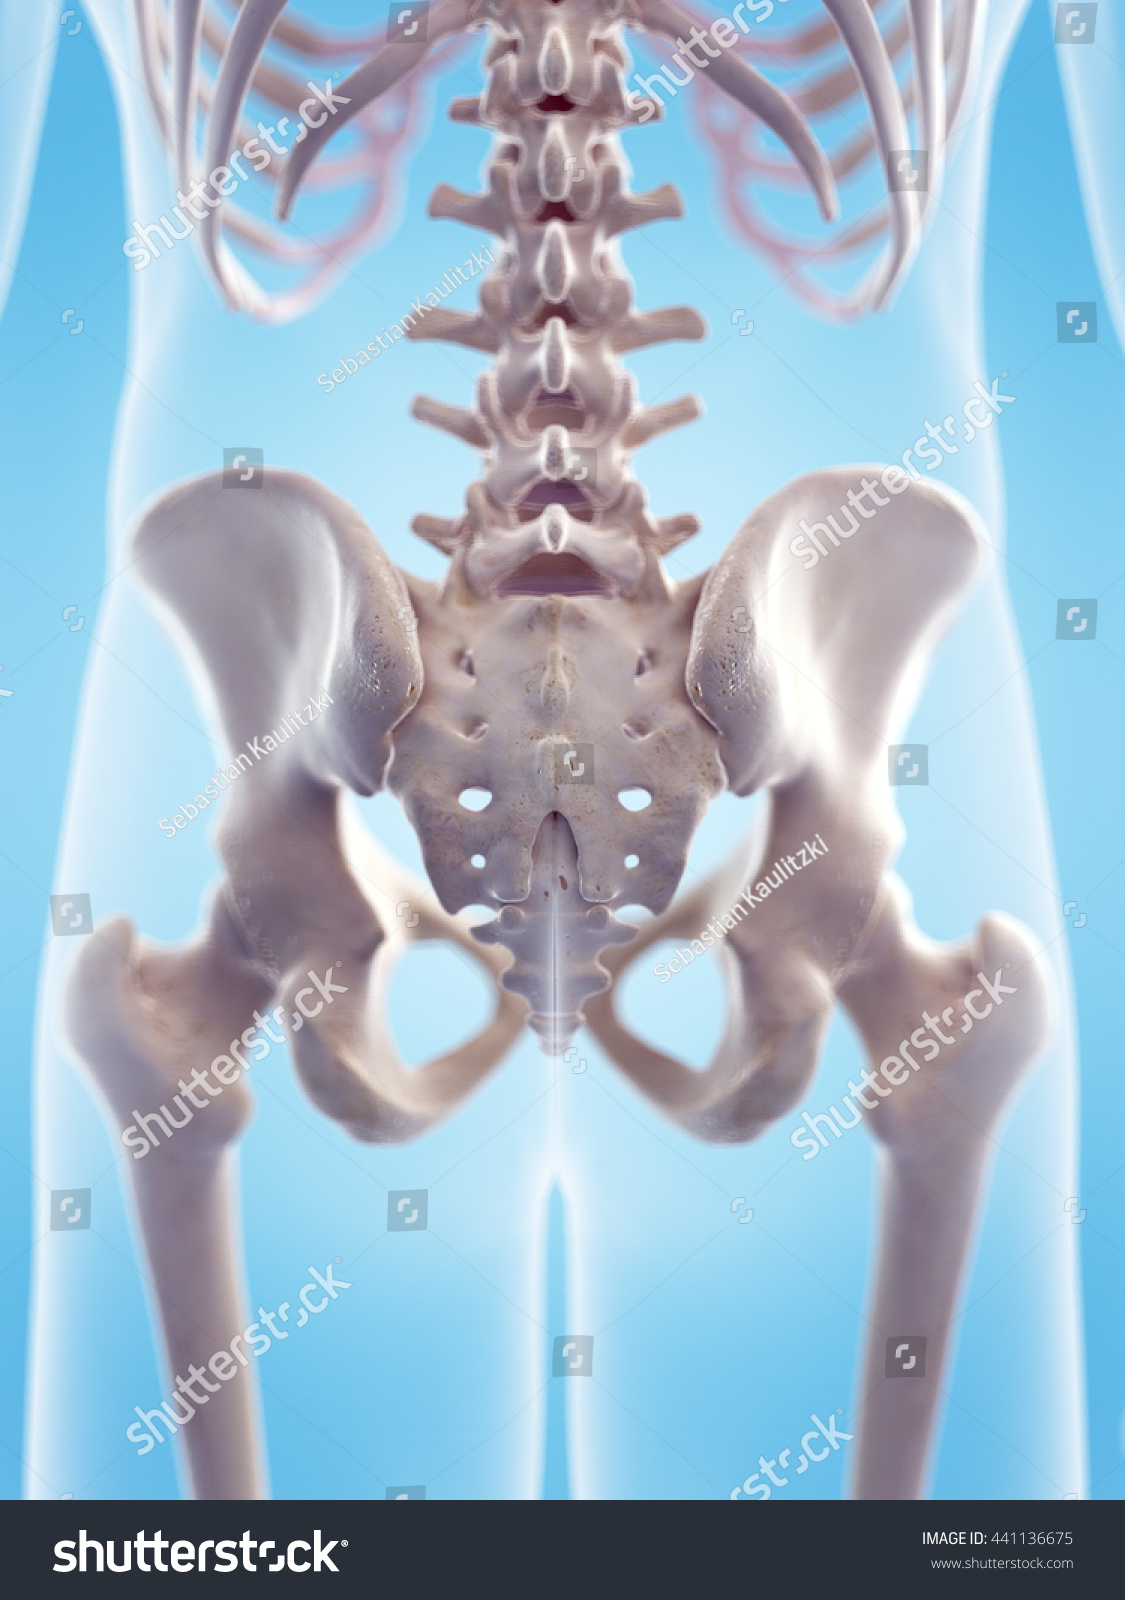 3d Rendered Medically Accurate 3d Illustration Stock Illustration 441136675